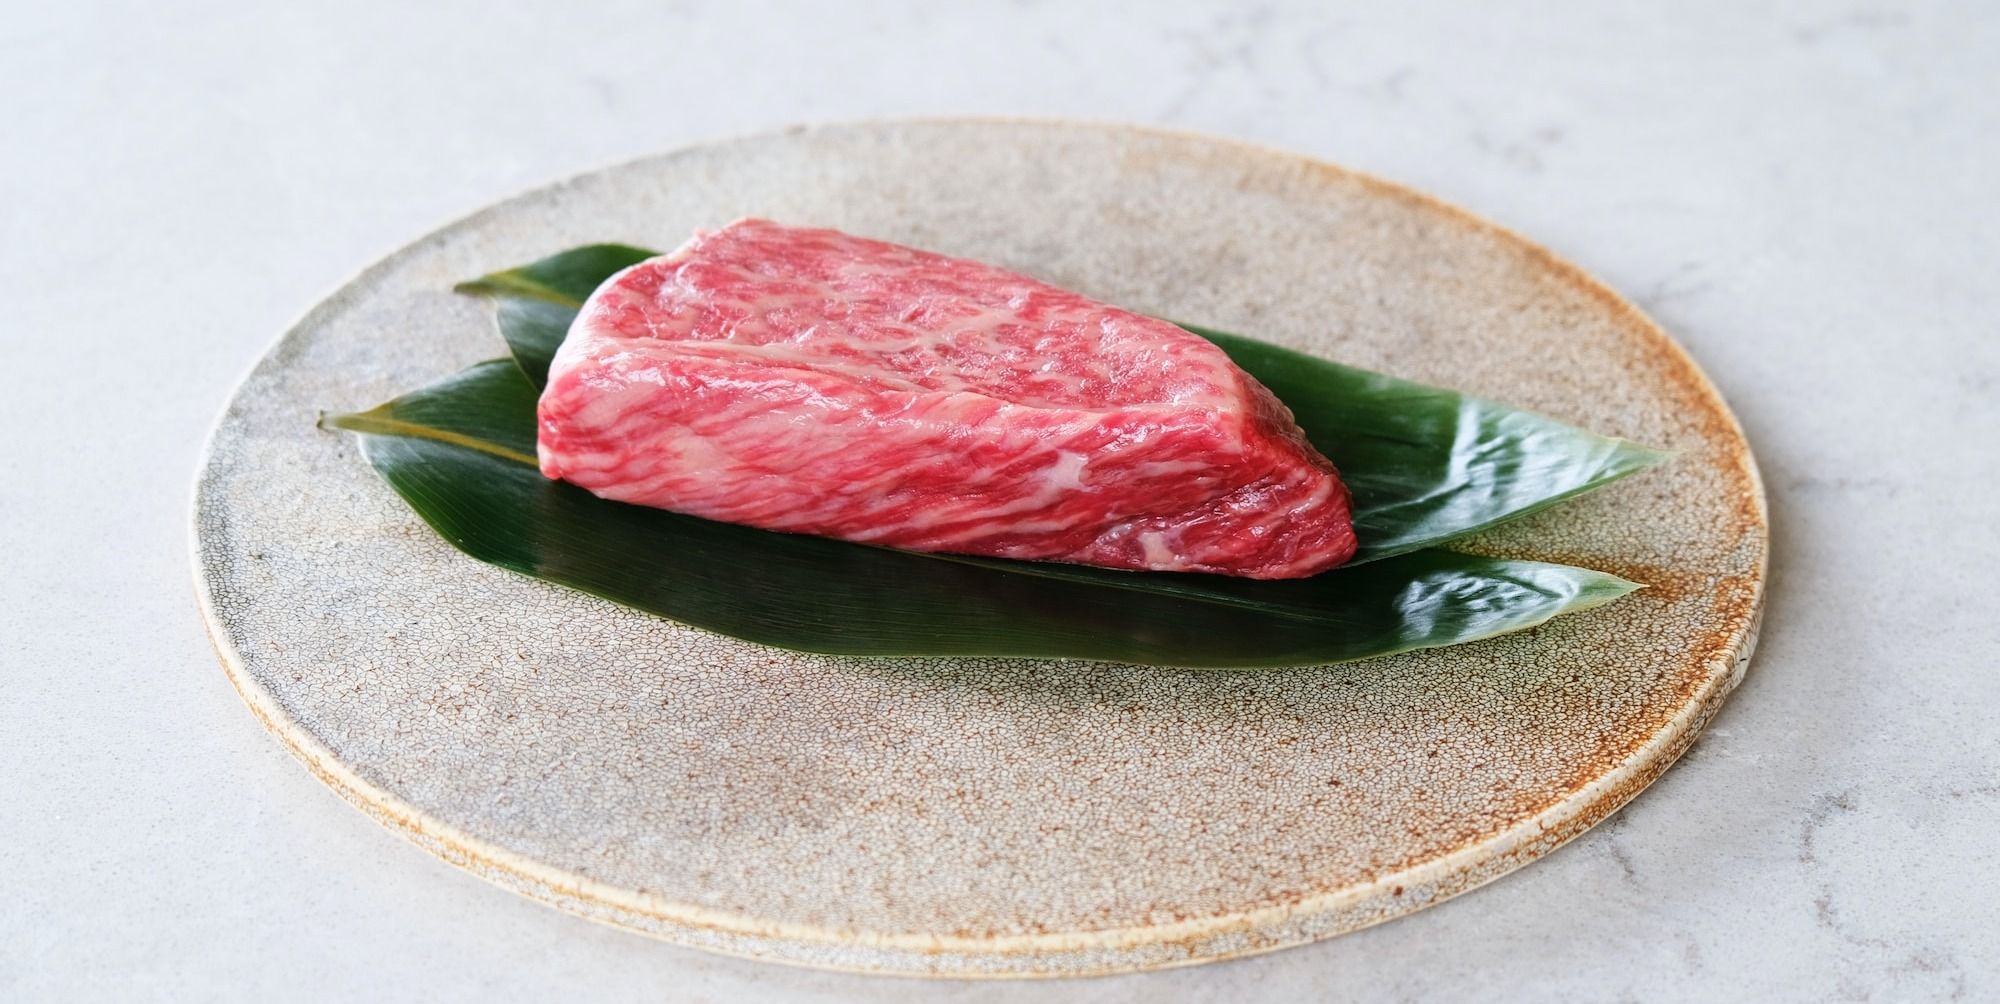 A5 Wagyu steak with intense marbling texture